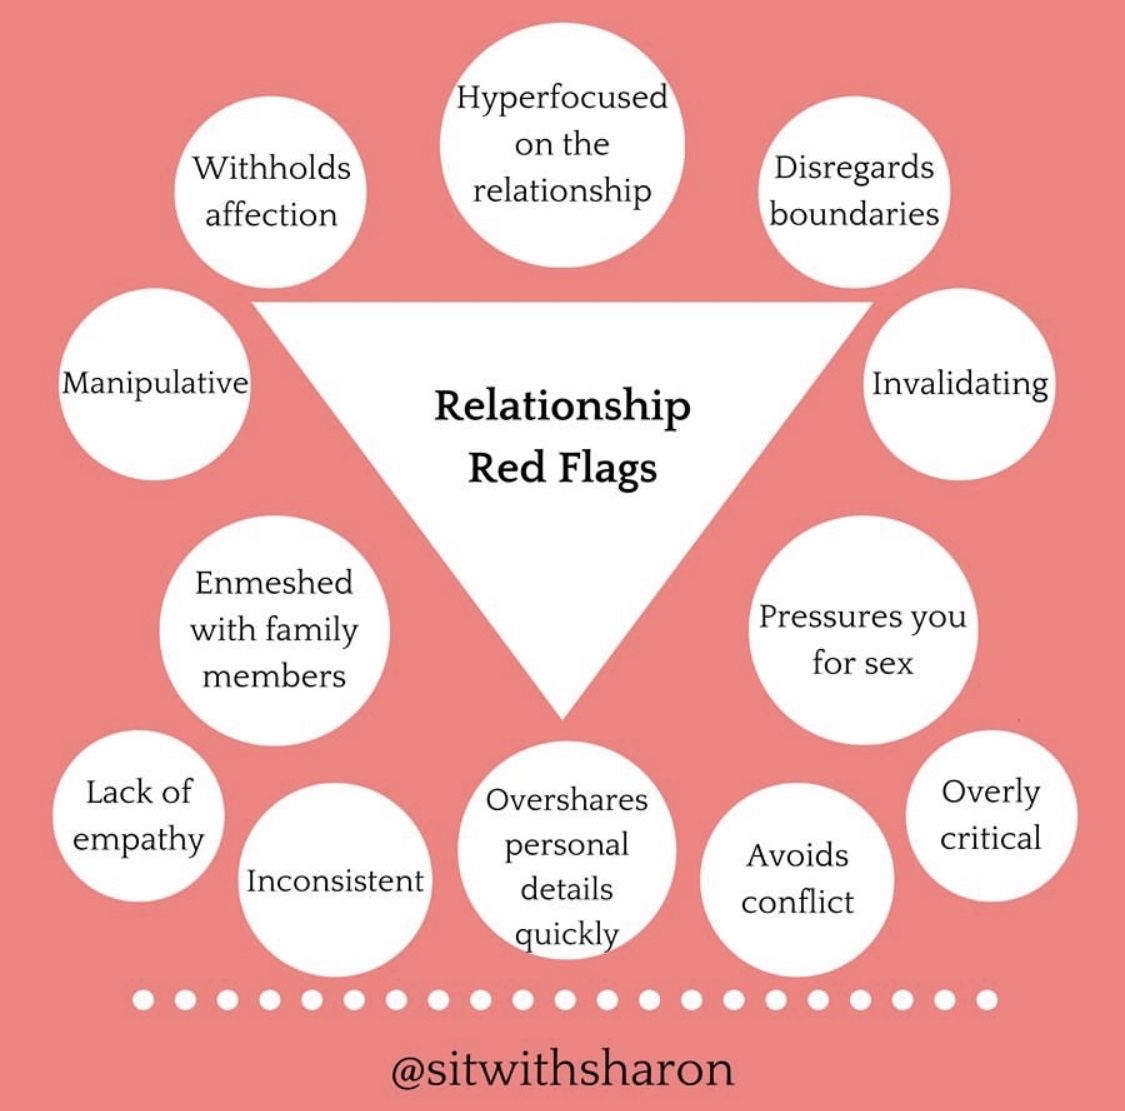 creativholistic.co 🌱 for now) on Twitter: "Relationship Red Flags vs Relationship Green Flags 💭 https://t.co/0Vxm1WmFzP" / Twitter